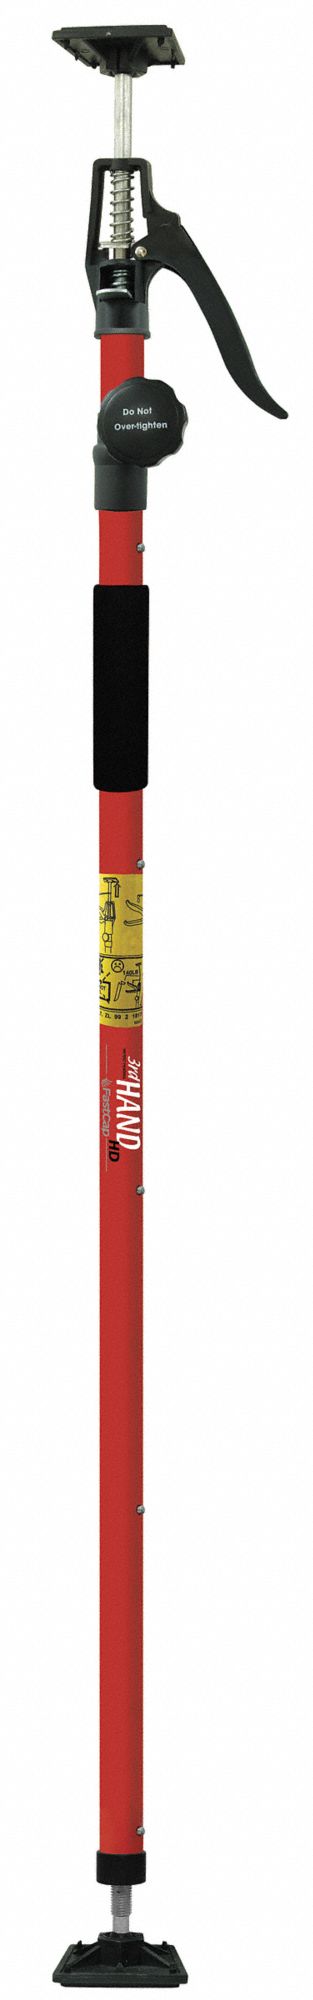 Extendable Utility Pole: Extends 16.5 in to 22.8 in Ht